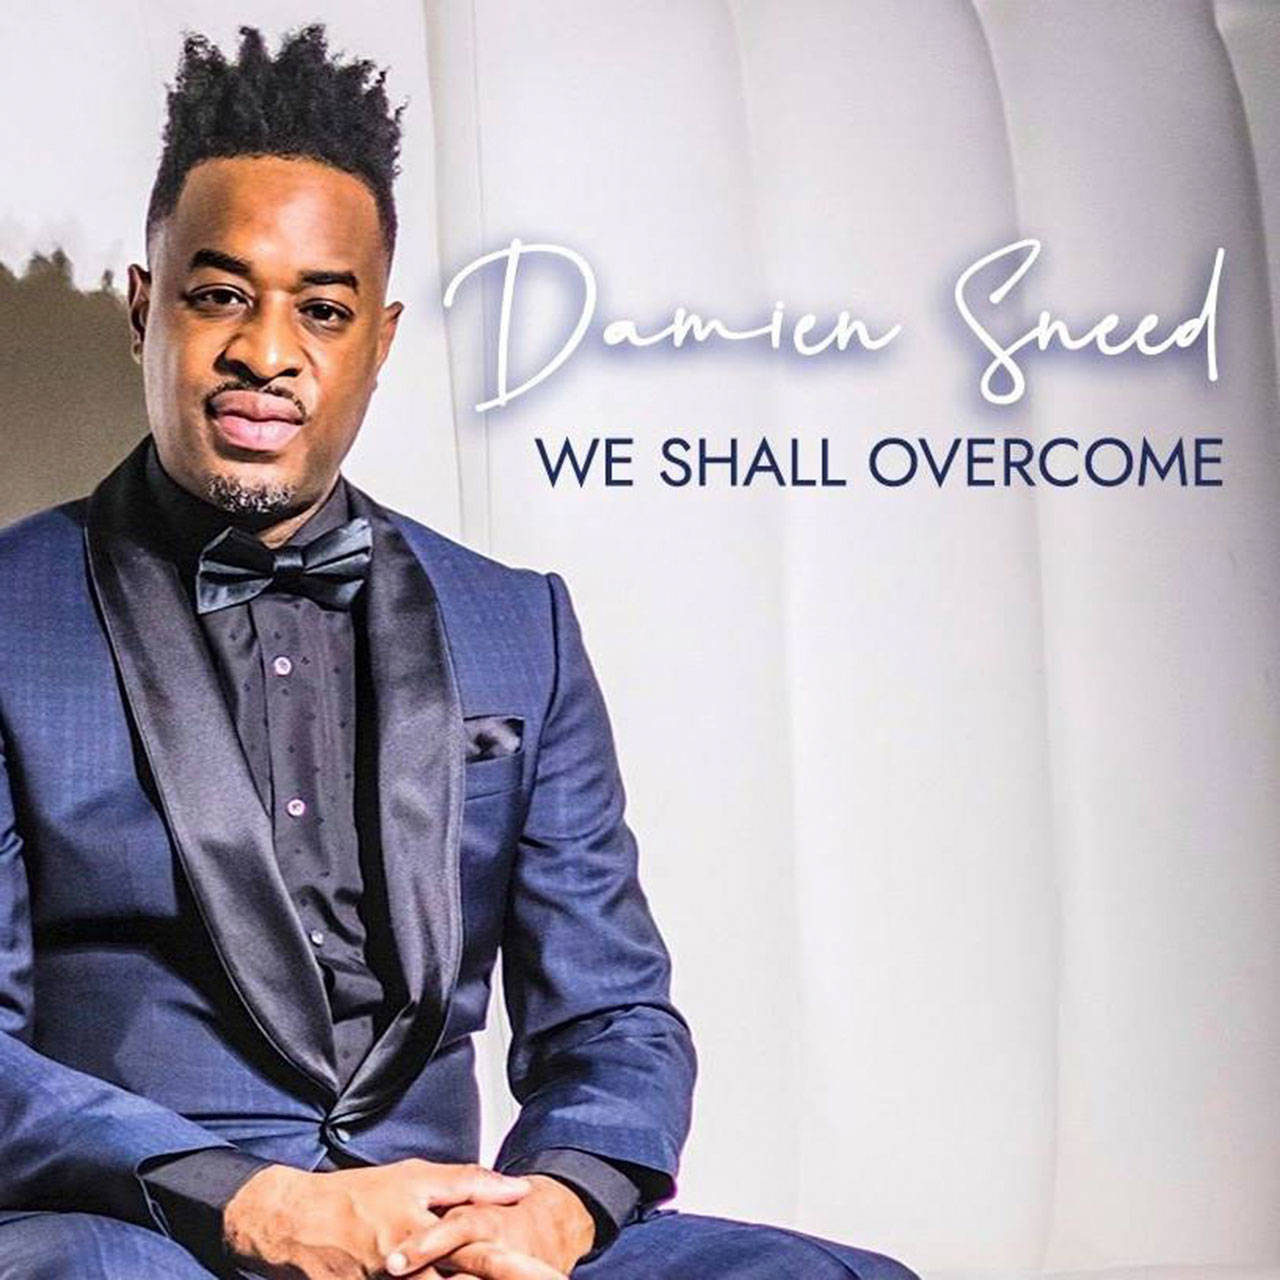 Damien Sneed leads the “We Shall Overcome” performance coming to Kent on March 13. COURTESY PHOTO, Damien Sneed